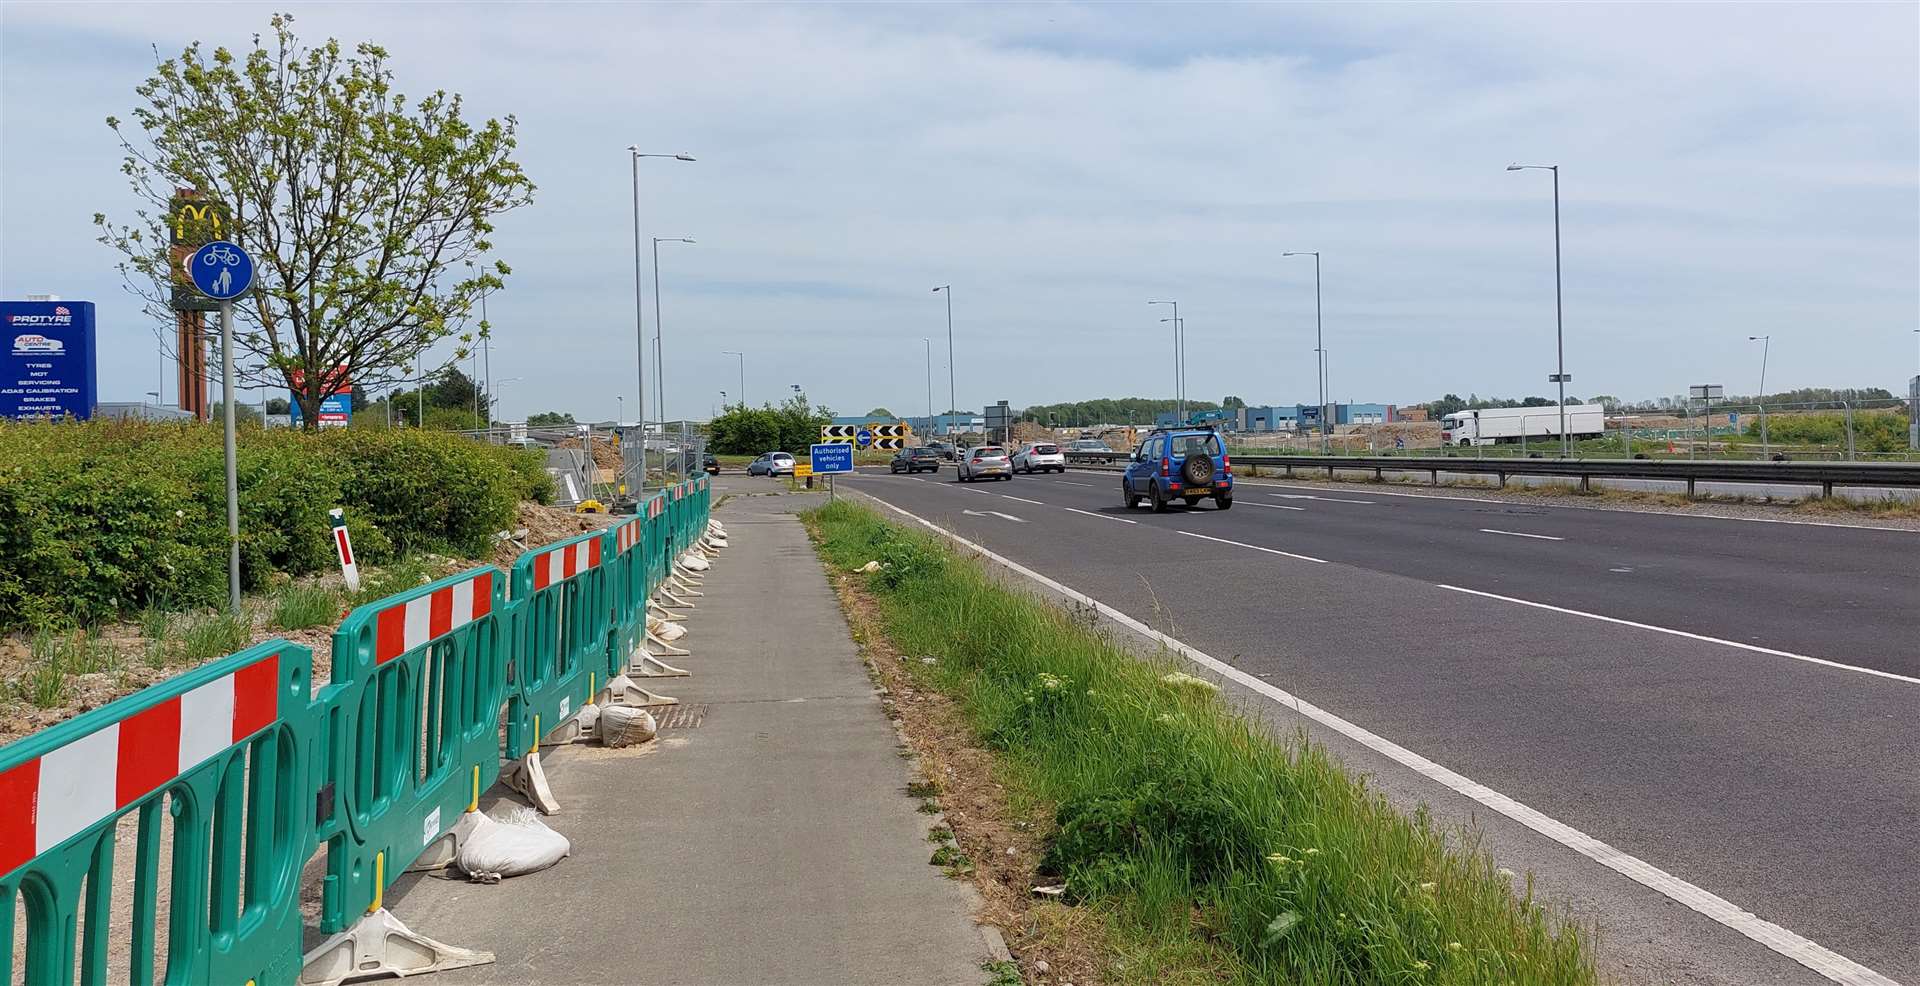 The westbound carriageway will close at 8pm tonight